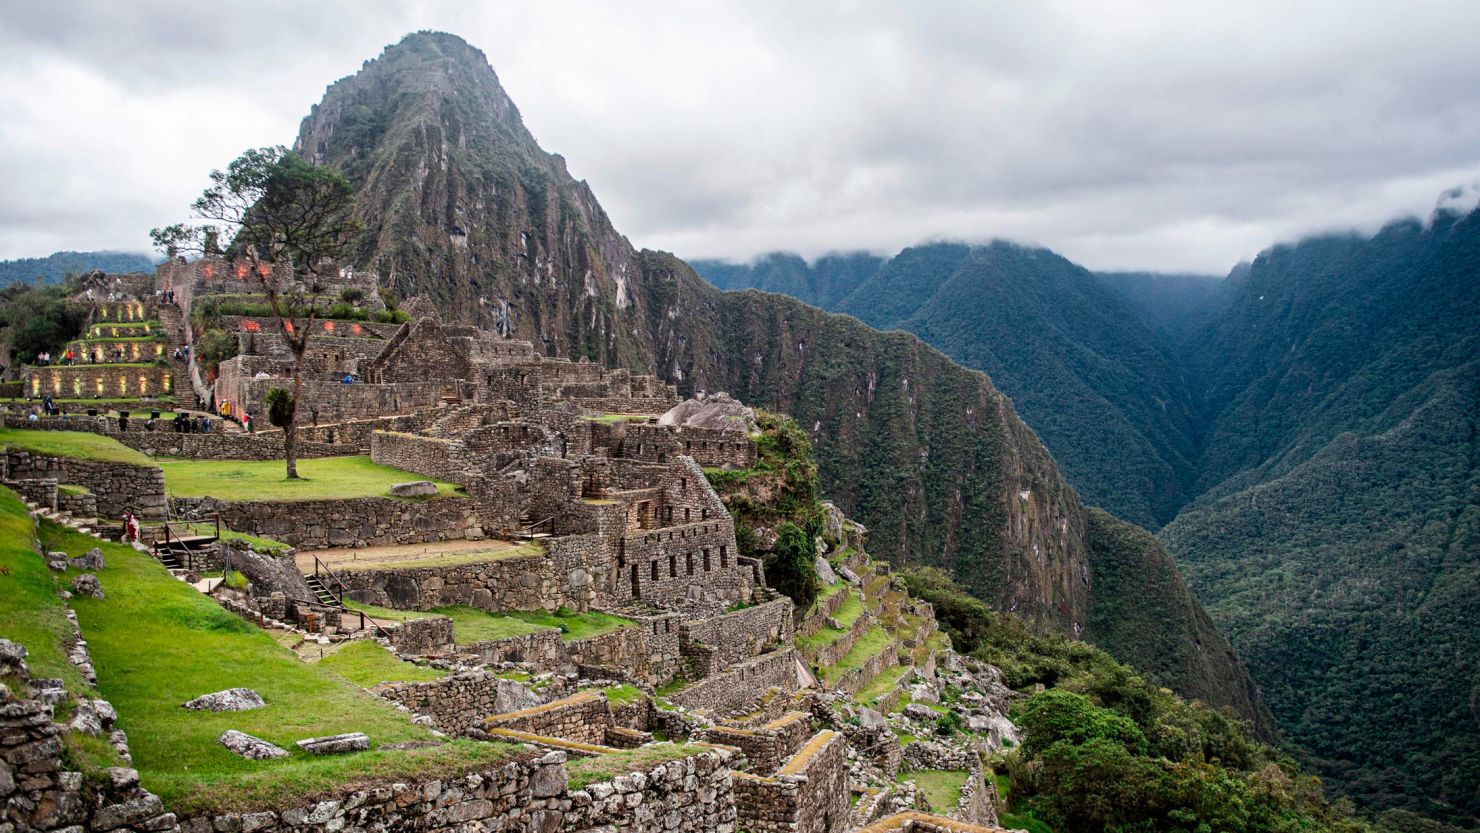 TOPSHOT - View of the archaeological site of Machu Picchu, in Cusco, Peru during its reopening ceremony on November 01, 2020, amid the new coronavirus pandemic. - The Inca citadel of Machu Picchu reopened on Sunday in the framework of a gradual decrease in COVID-19 contagions in Peru, after remaining empty almost eight months, affecting the tourism sector severely (Photo by ERNESTO BENAVIDES / AFP) (Photo by ERNESTO BENAVIDES/AFP via Getty Images)